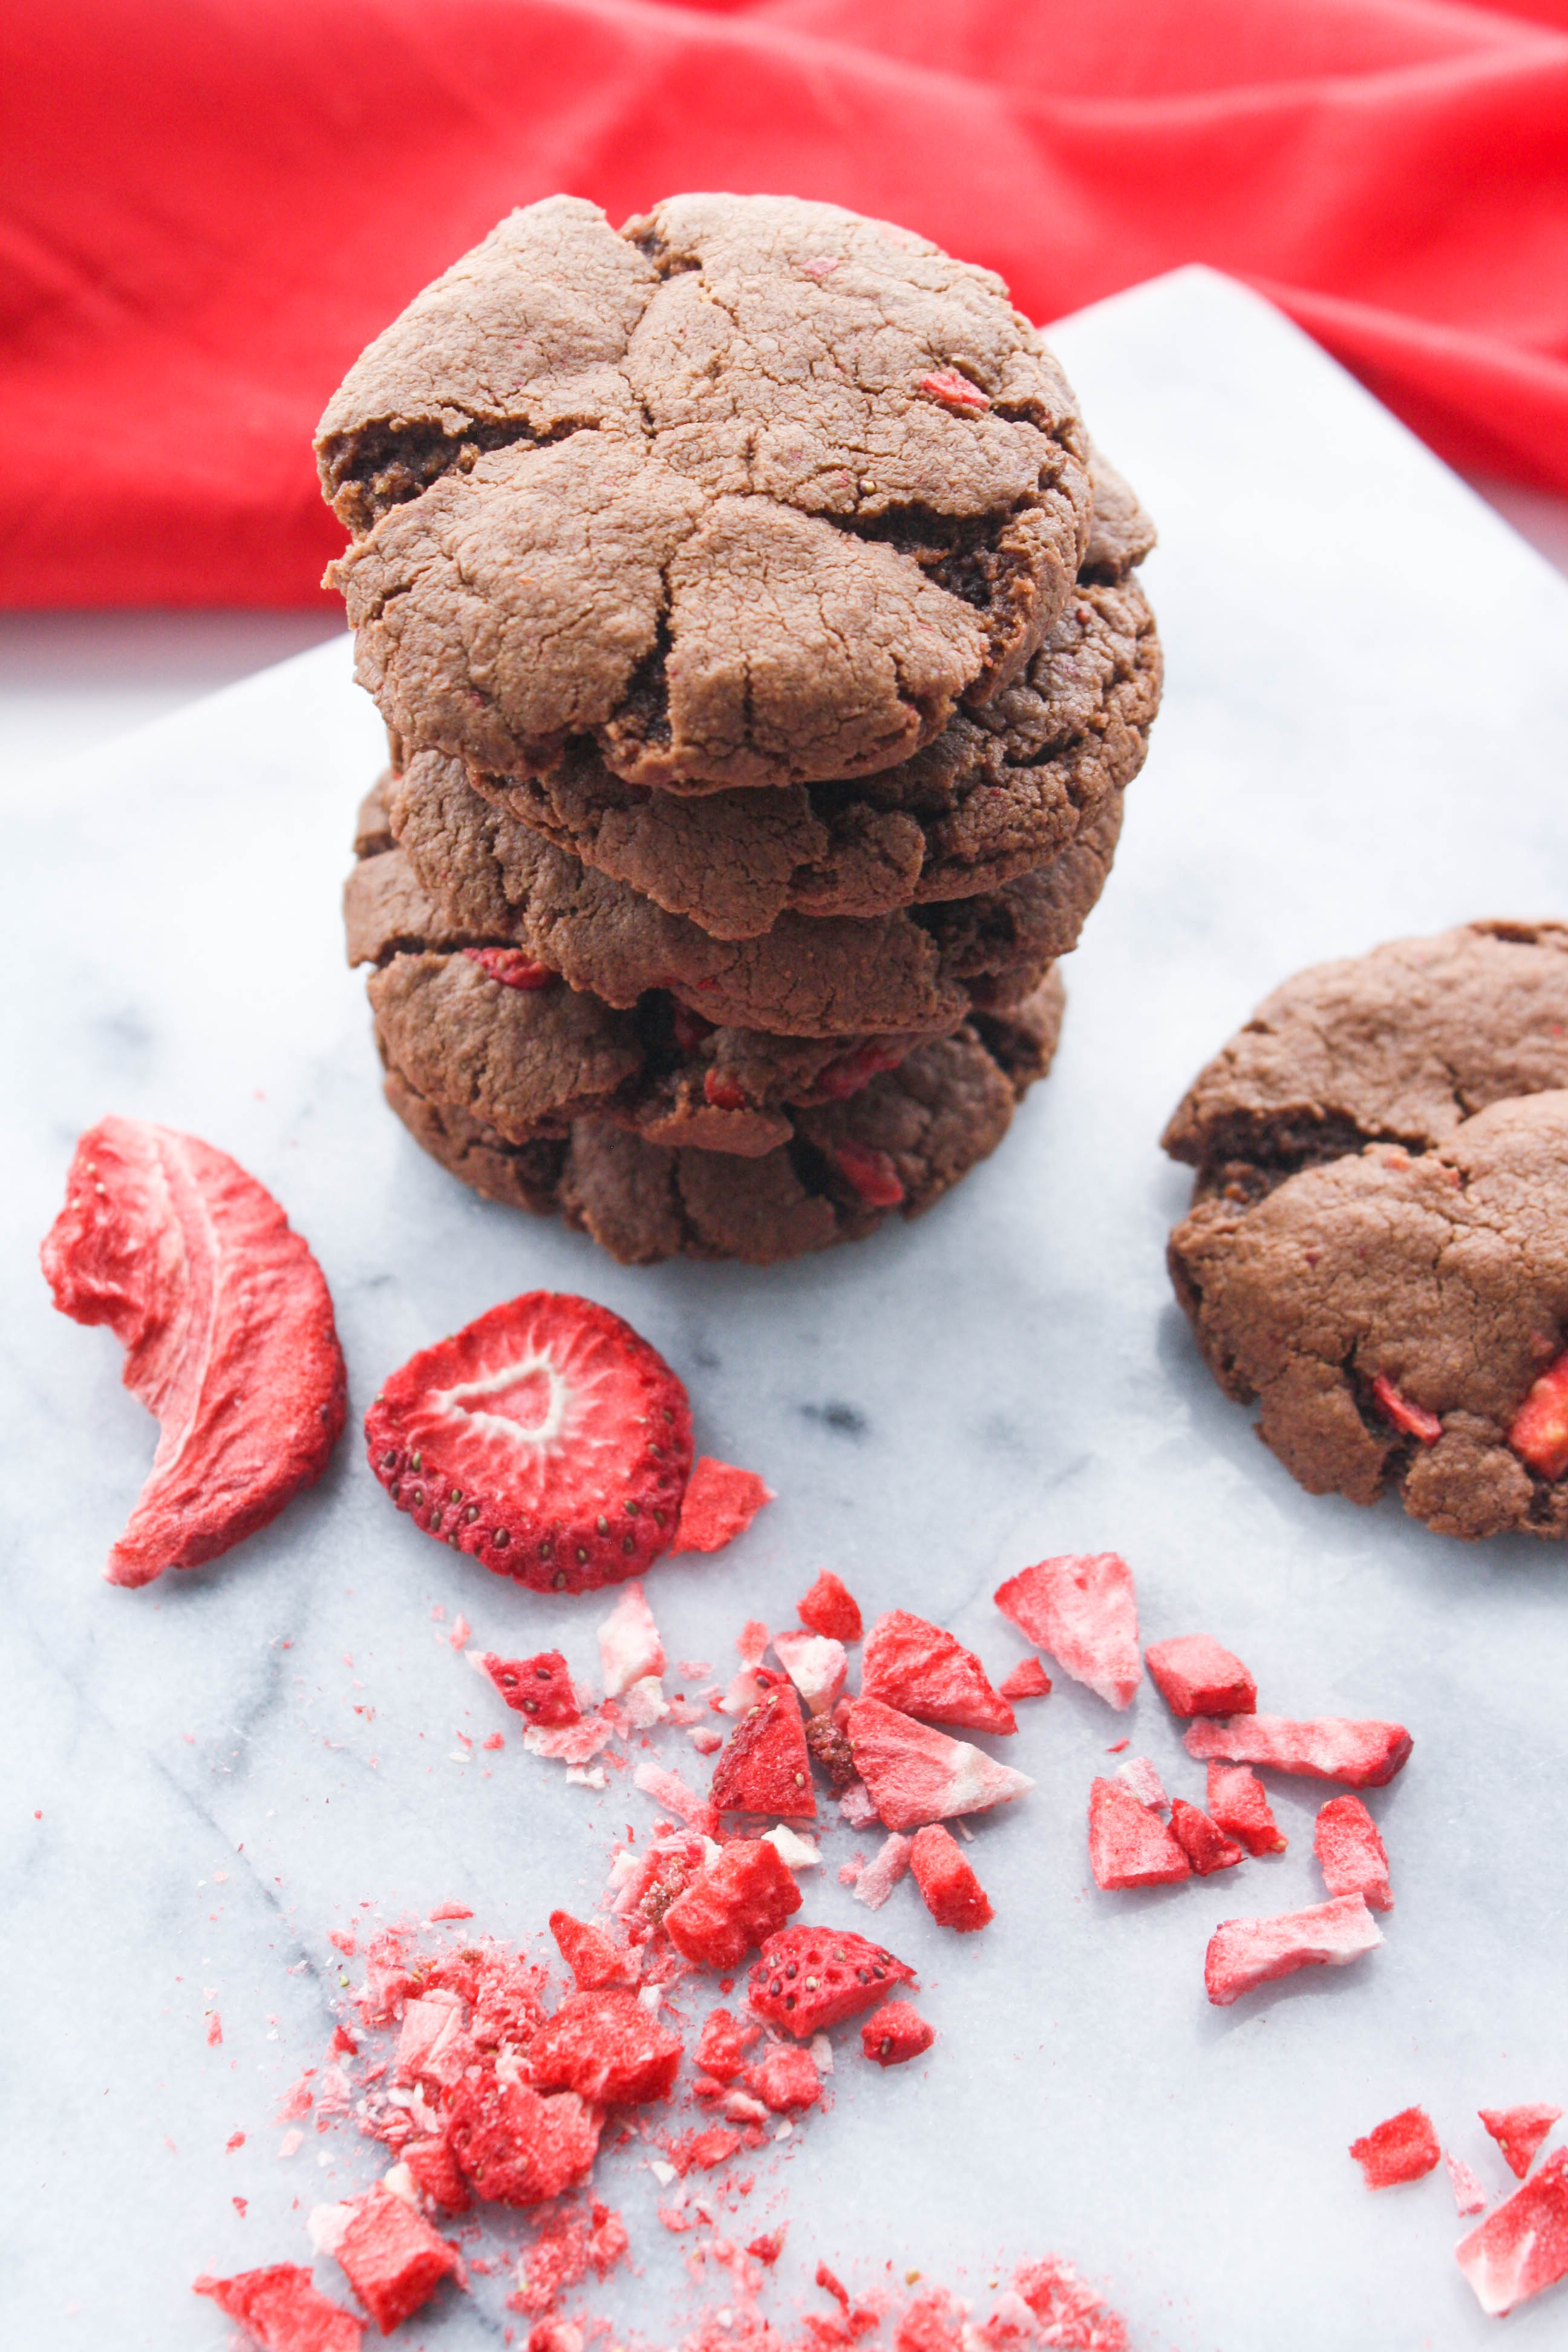 Strawberry-Nutella Cookie Ice Cream Sandwiches are the perfect treats for Valentine's Day! These strawberry-Nutella cookies are good any day of the year, and better when you turn them into ice cream sandwiches!